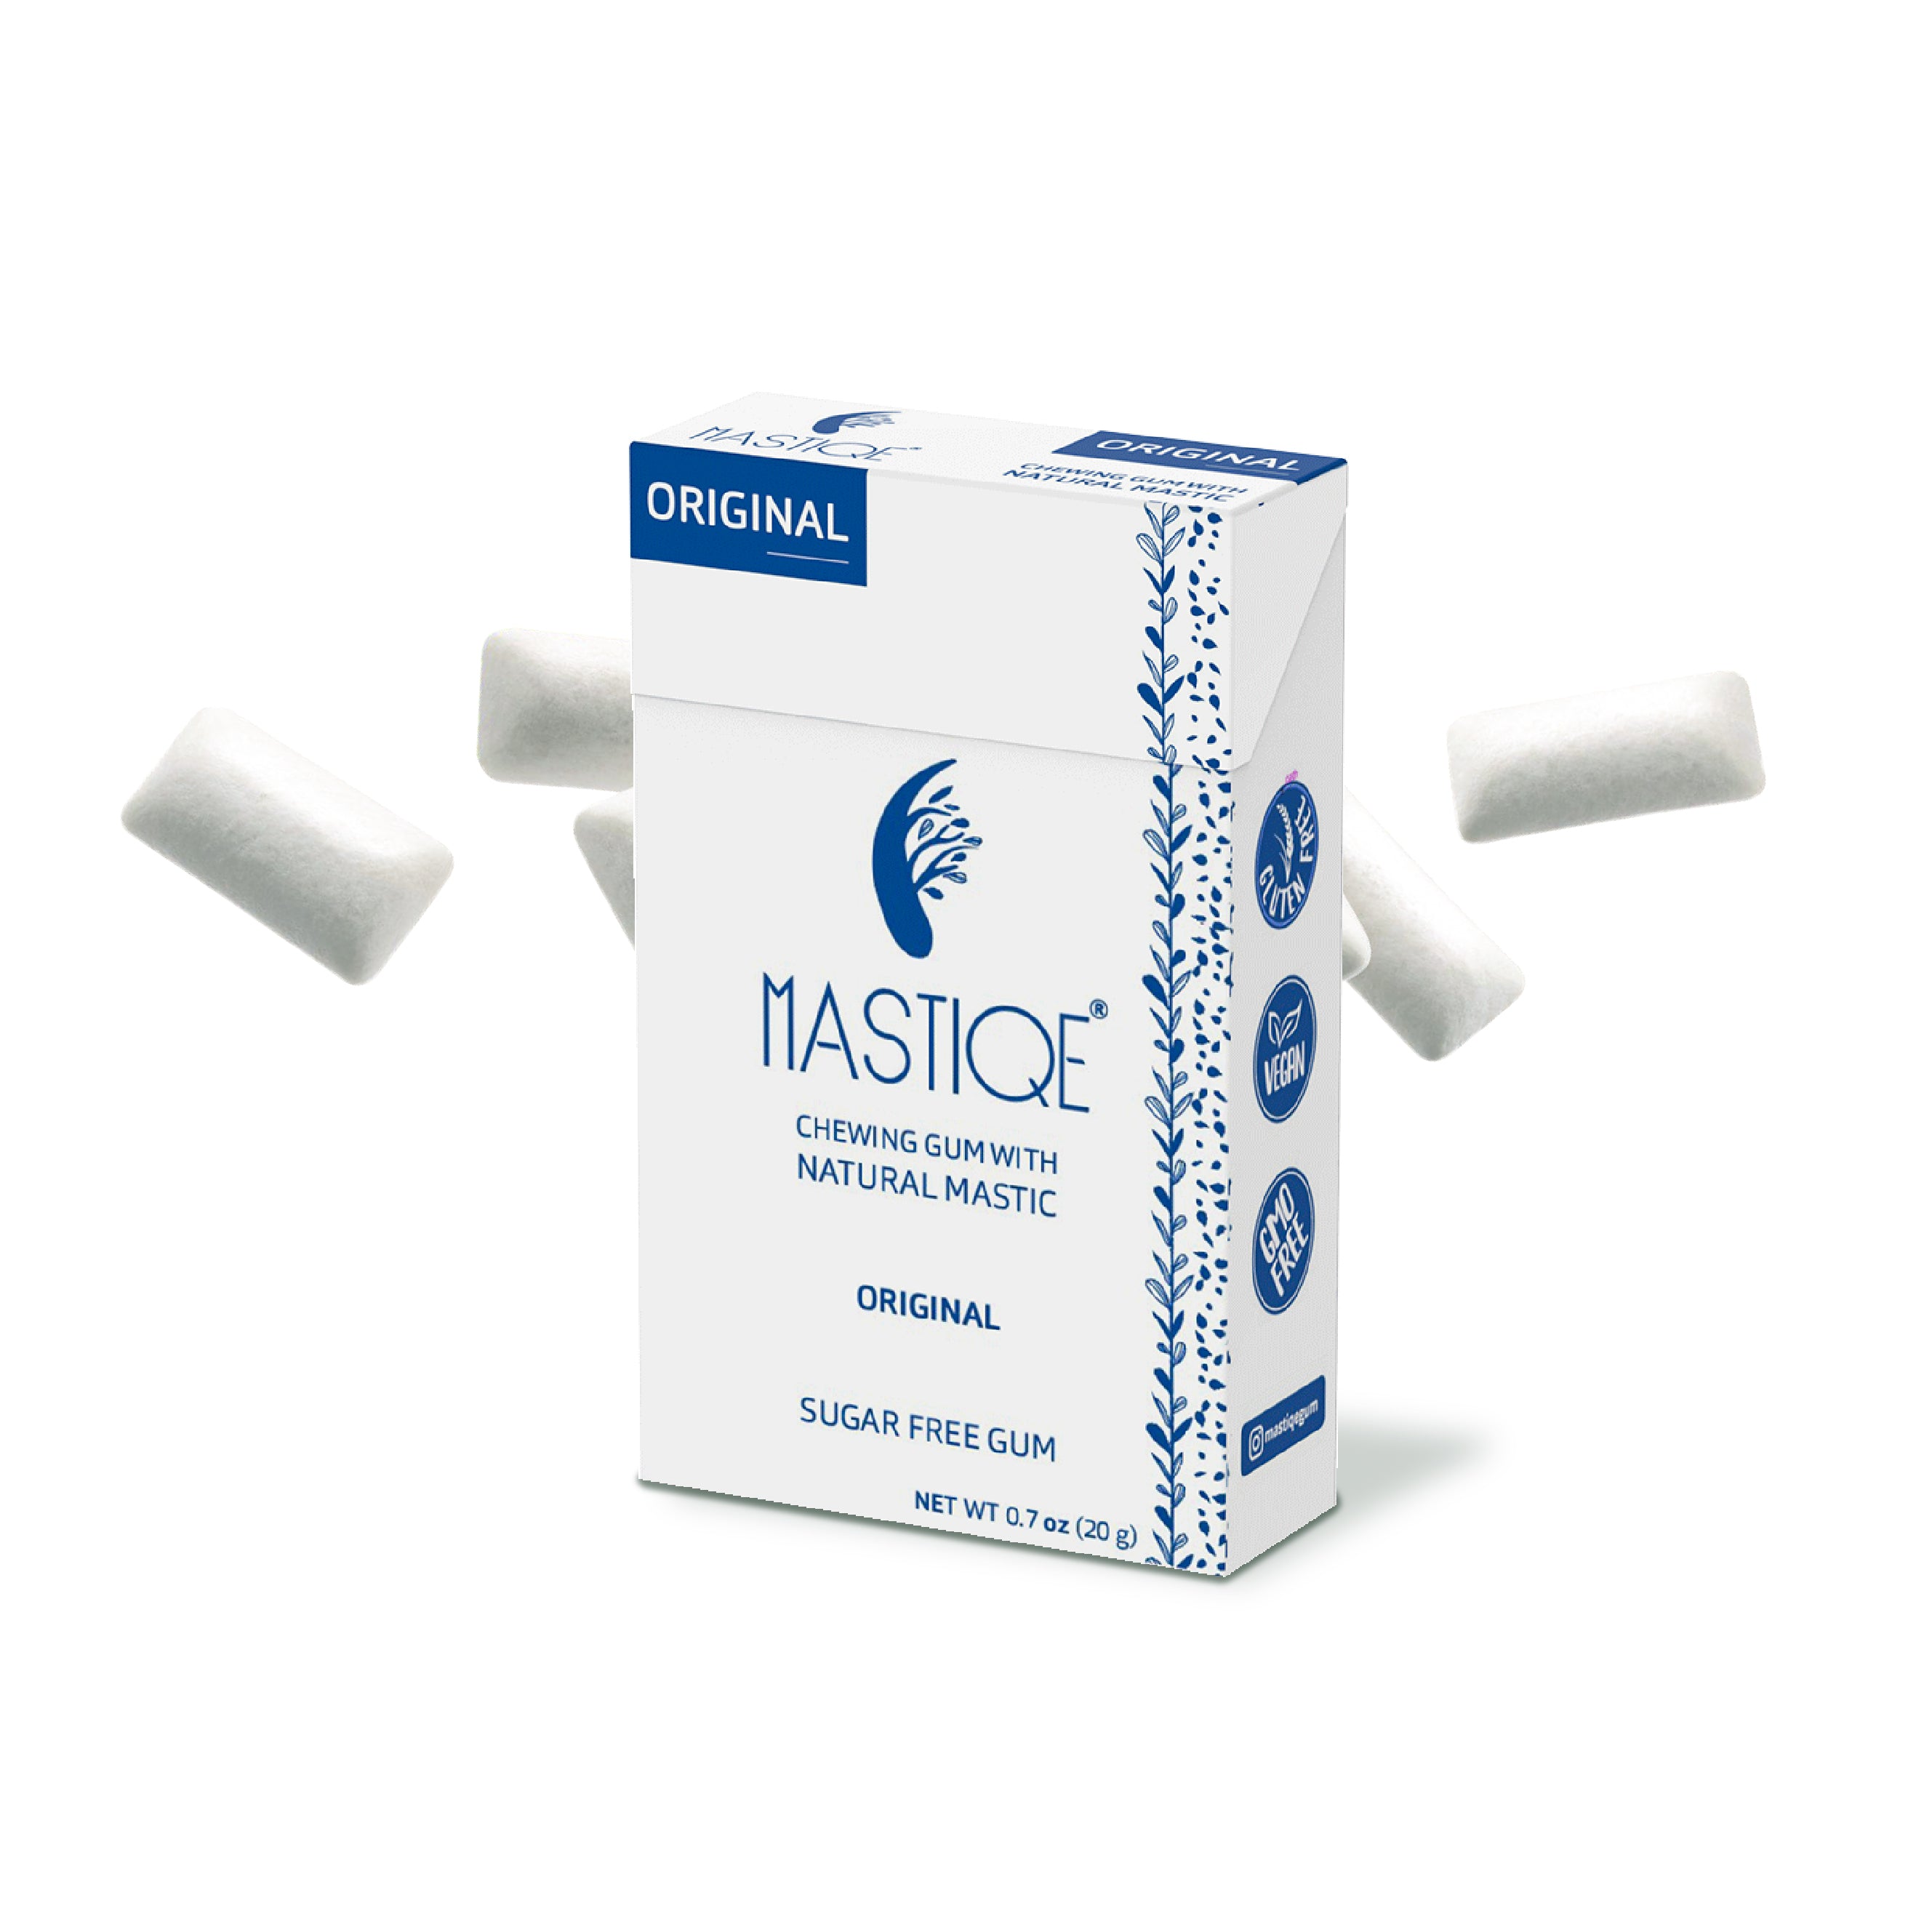 All New! Mastiqe Hard Chewing Gum with Natural Mastic, Original (20-Pack)